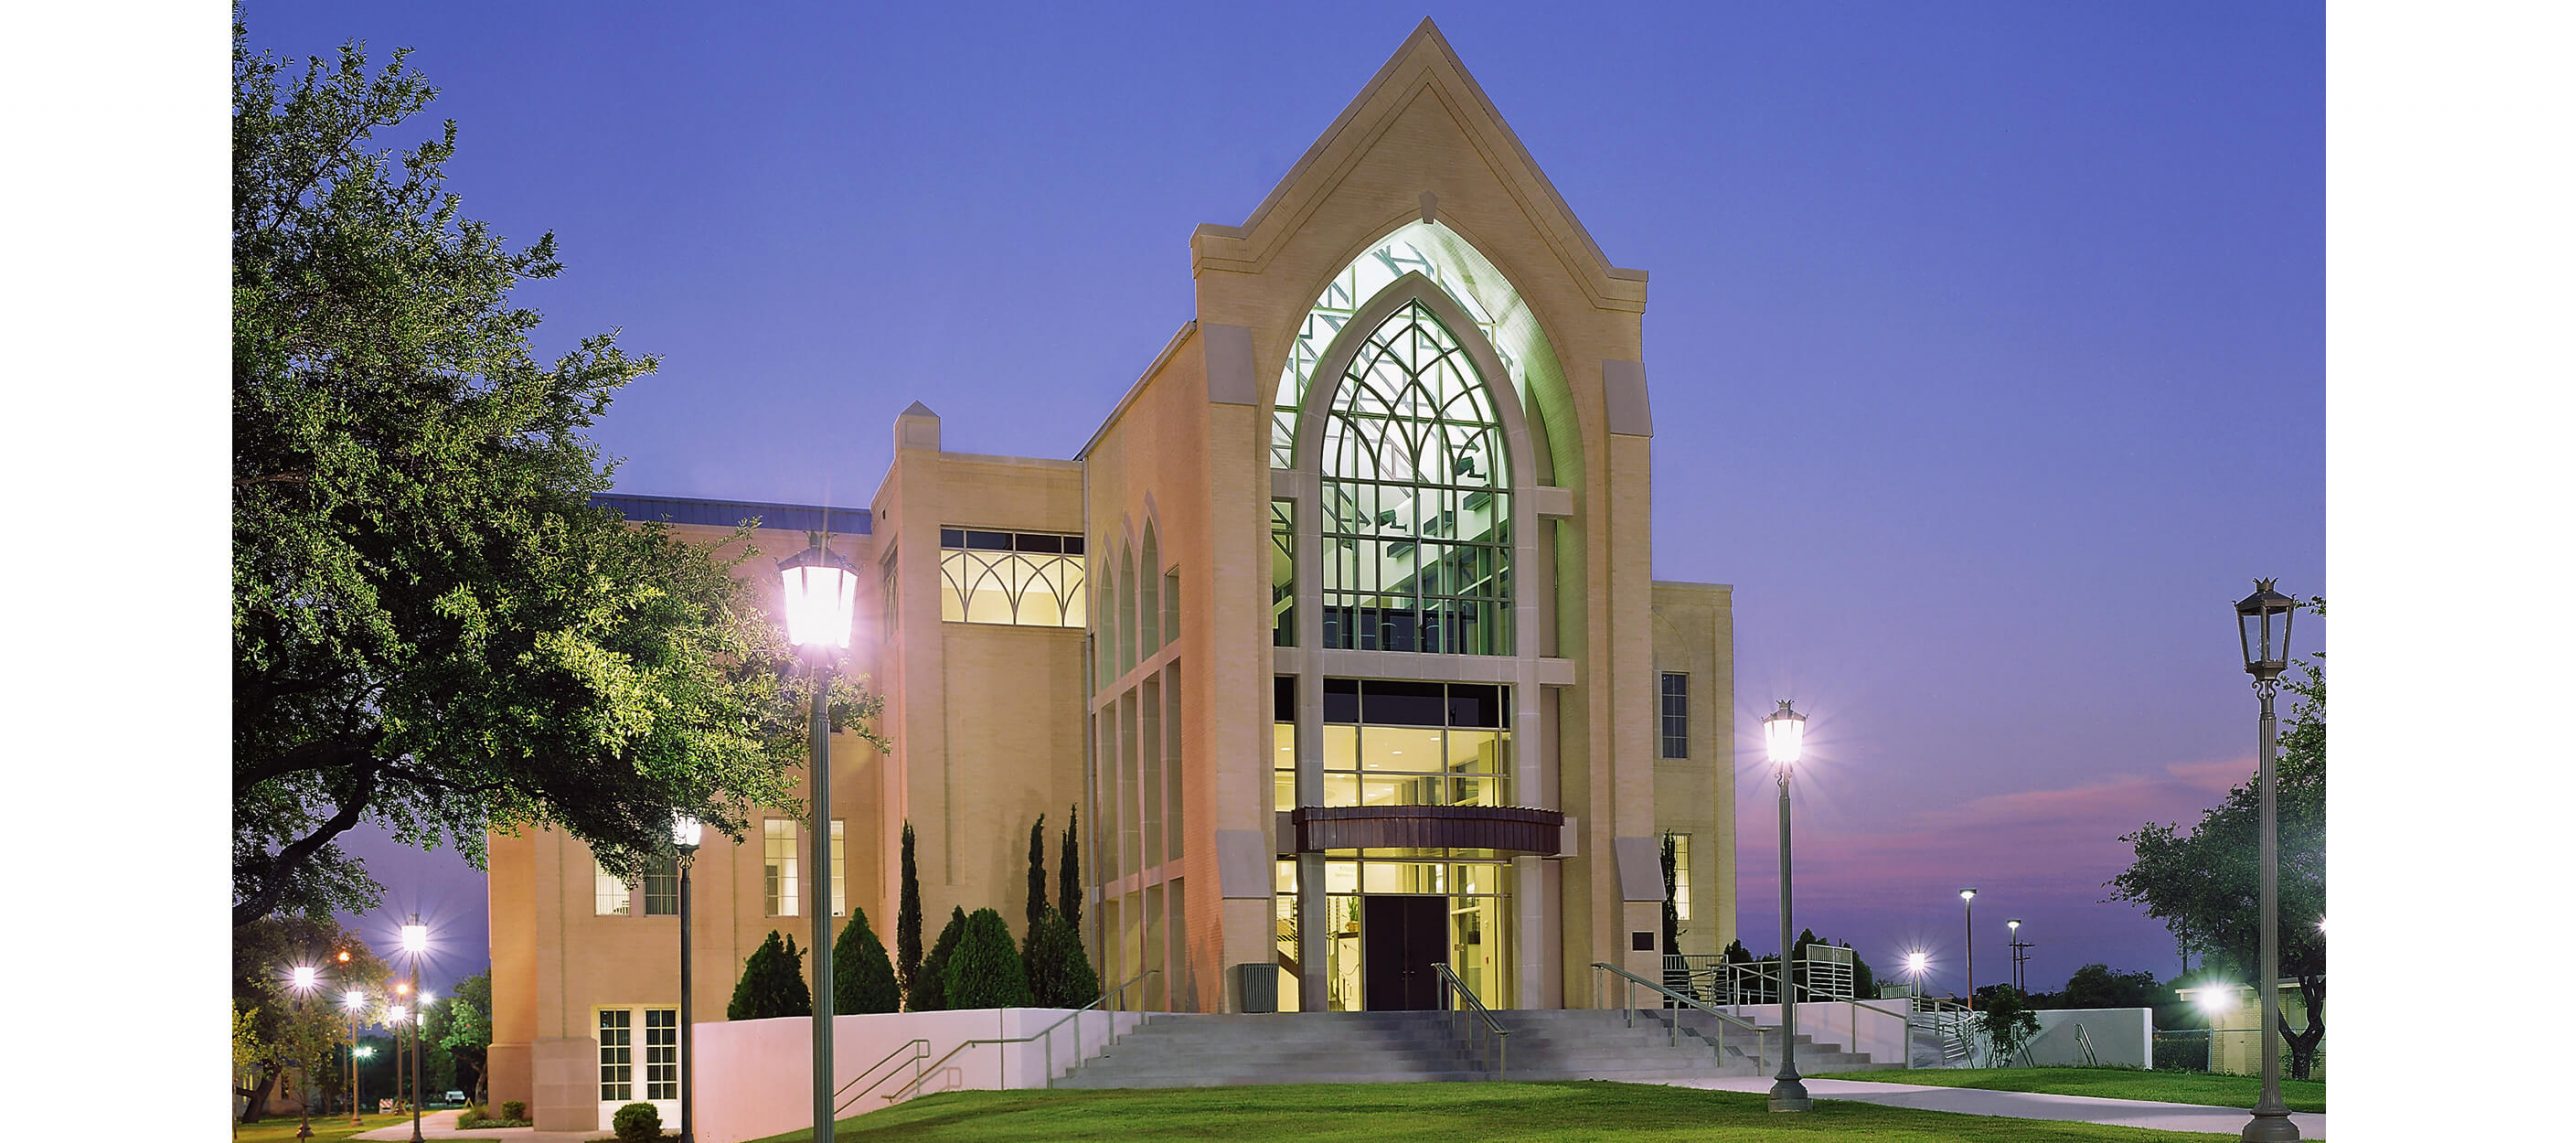 Our Lady of the Lake University – GBA Architects, San Antonio